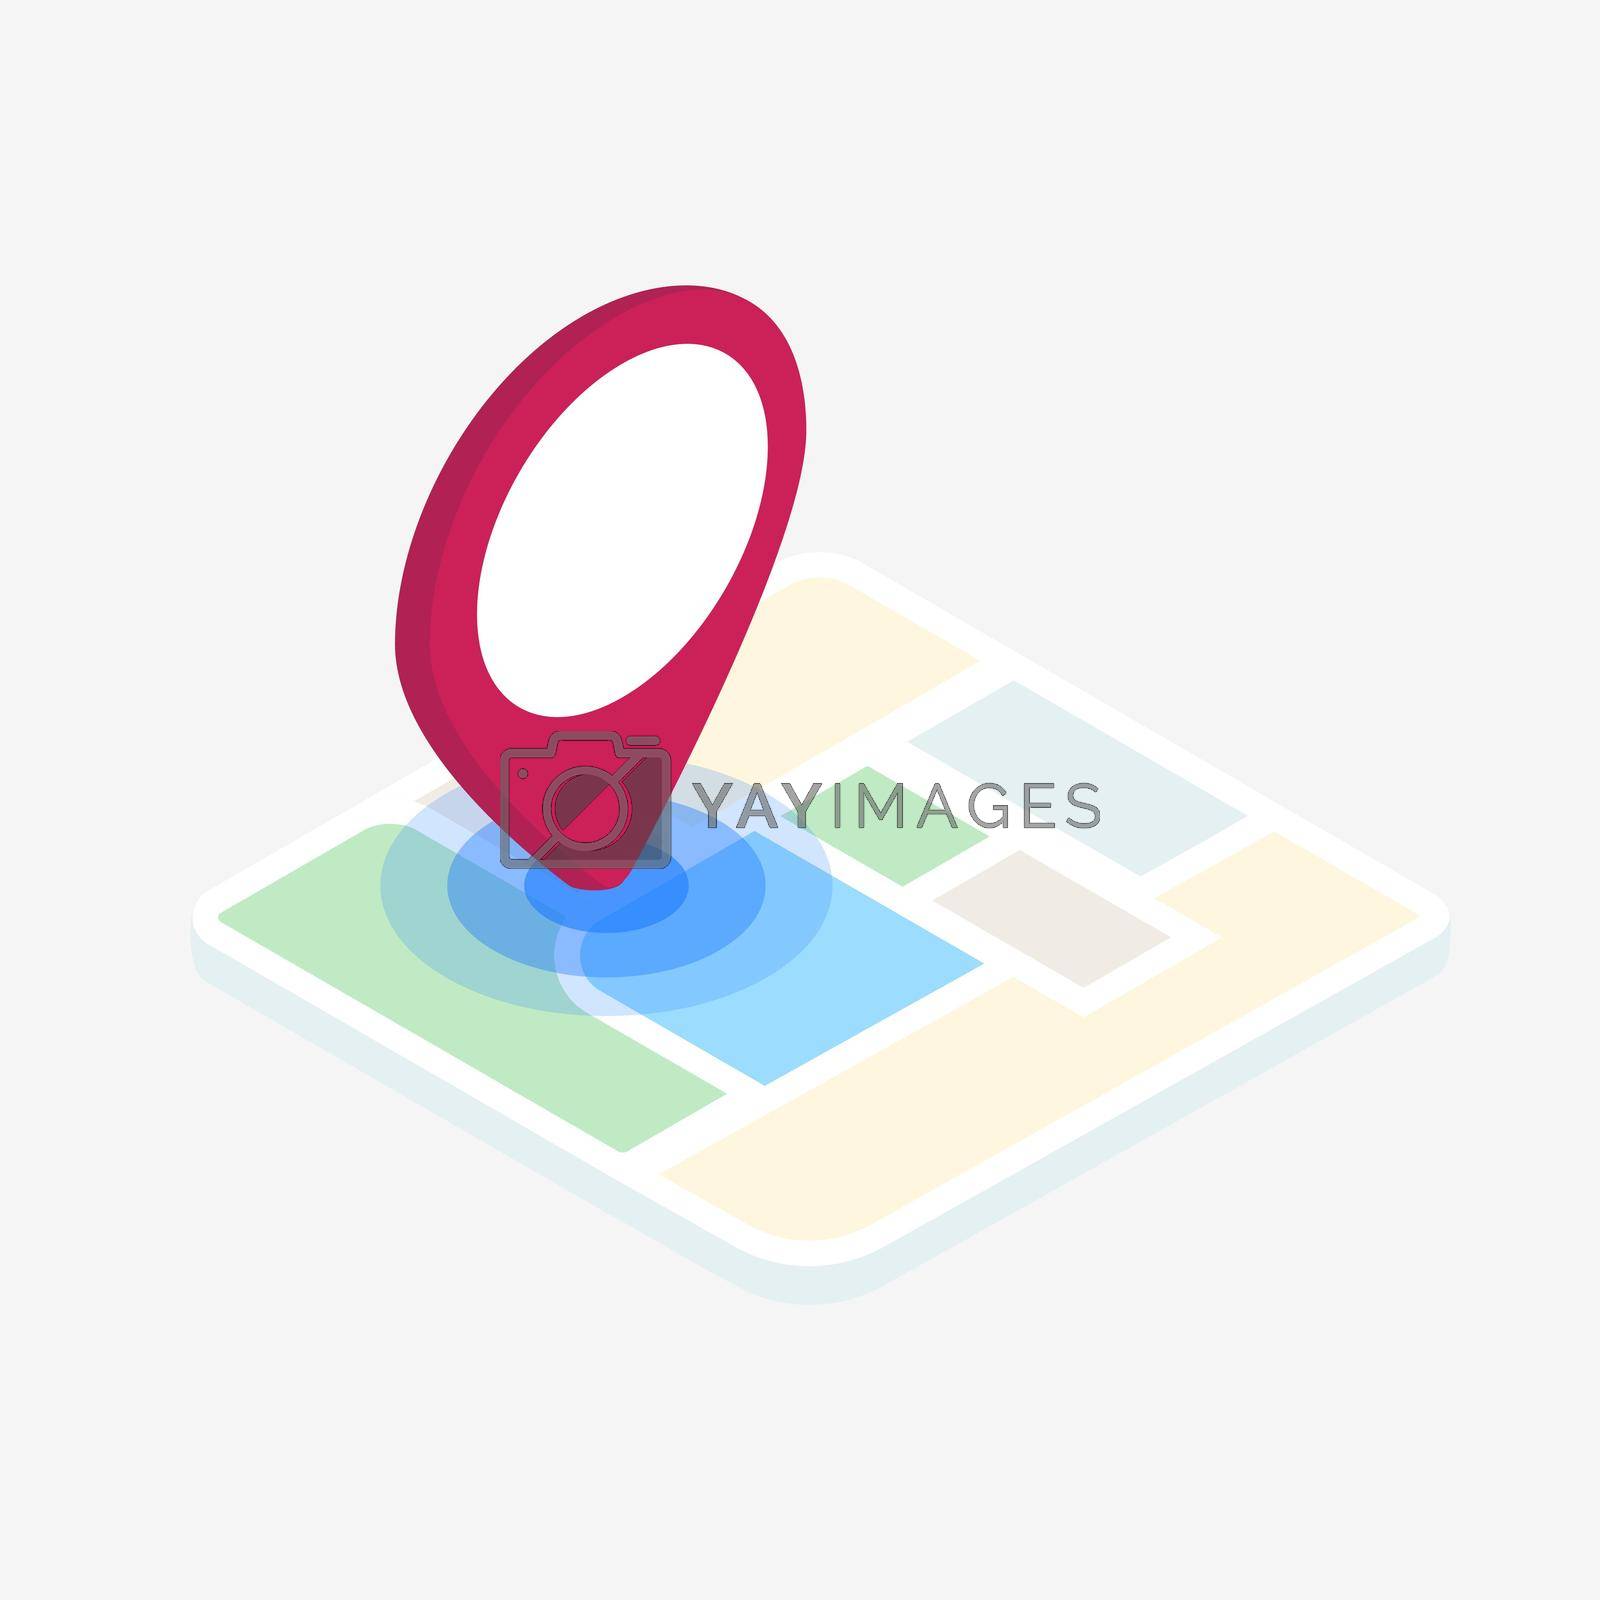 Royalty free image of Isometric map with red pin pint - gps location icon. Flat design concept. Vector illustration by bestforbest